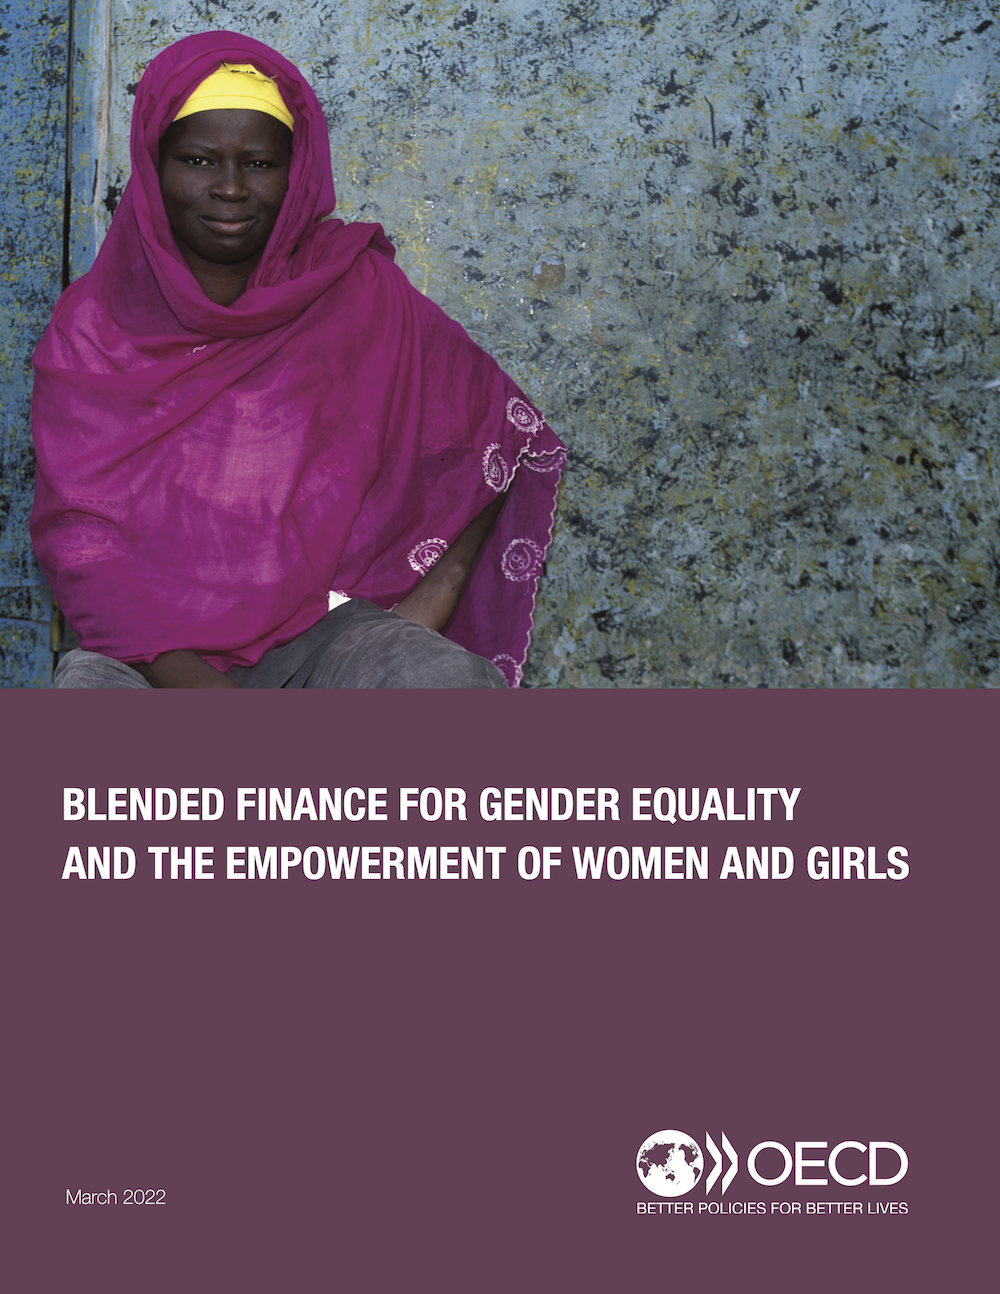 Blended Finance for Gender Equality and Empowerment of Women and Girls